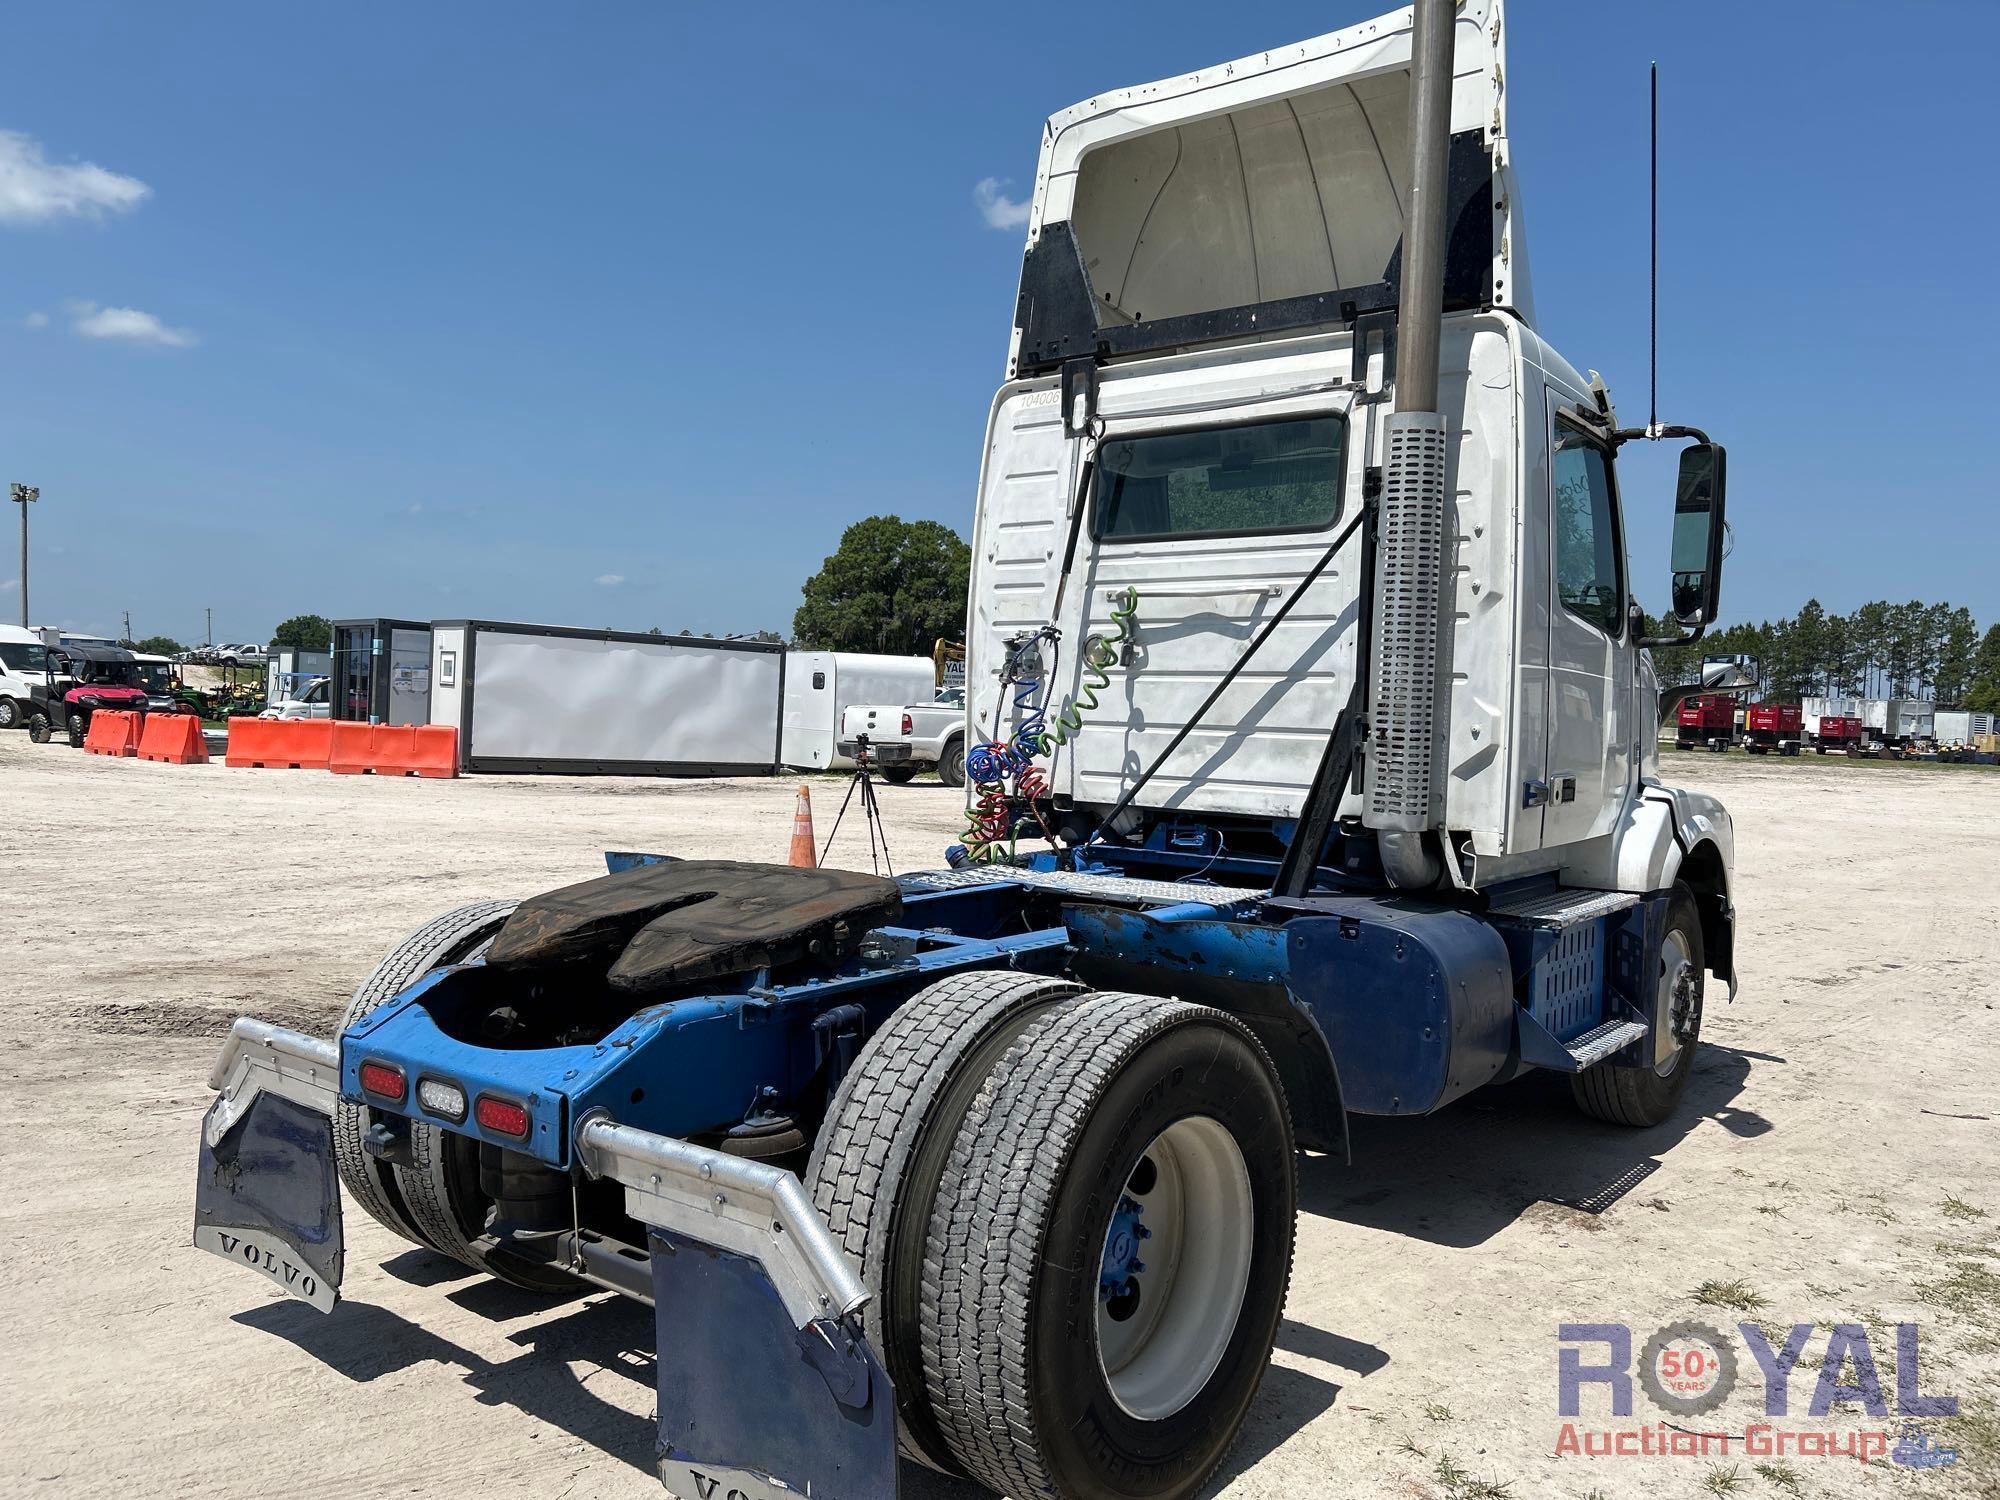 2015 Volvo VNL S/A Day Cab Truck Tractor